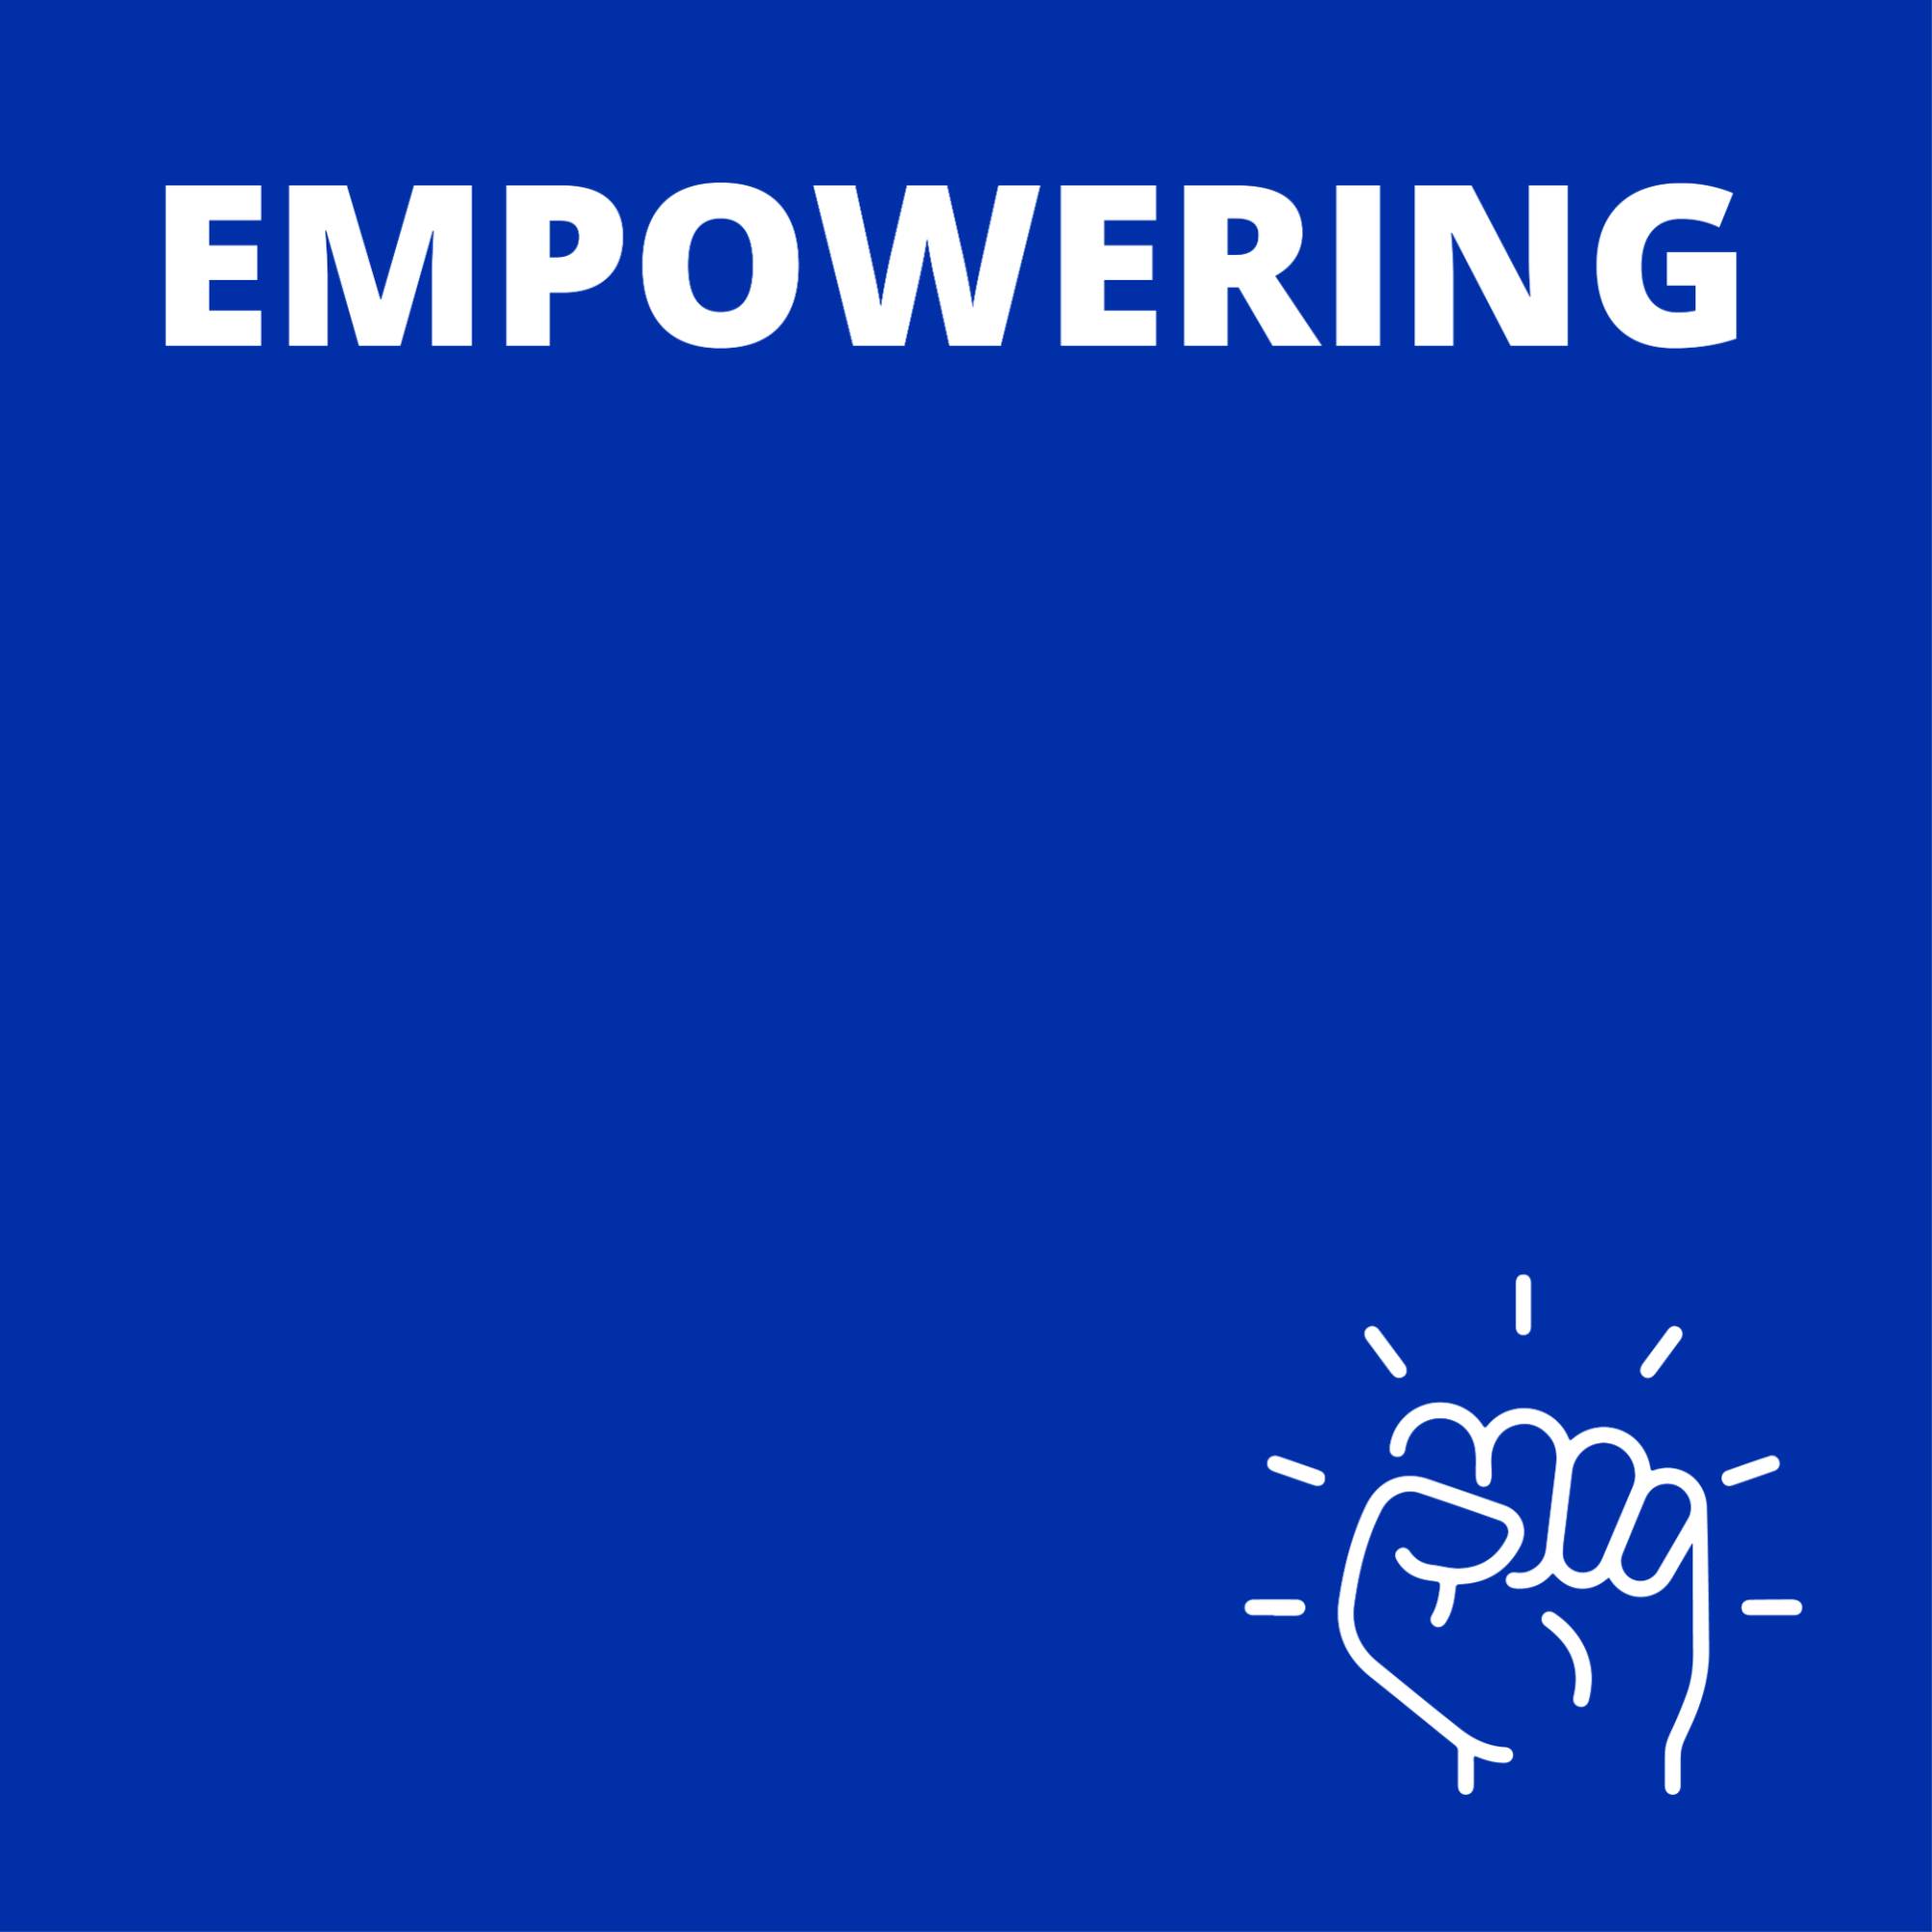 "Empowering" text with fist icon